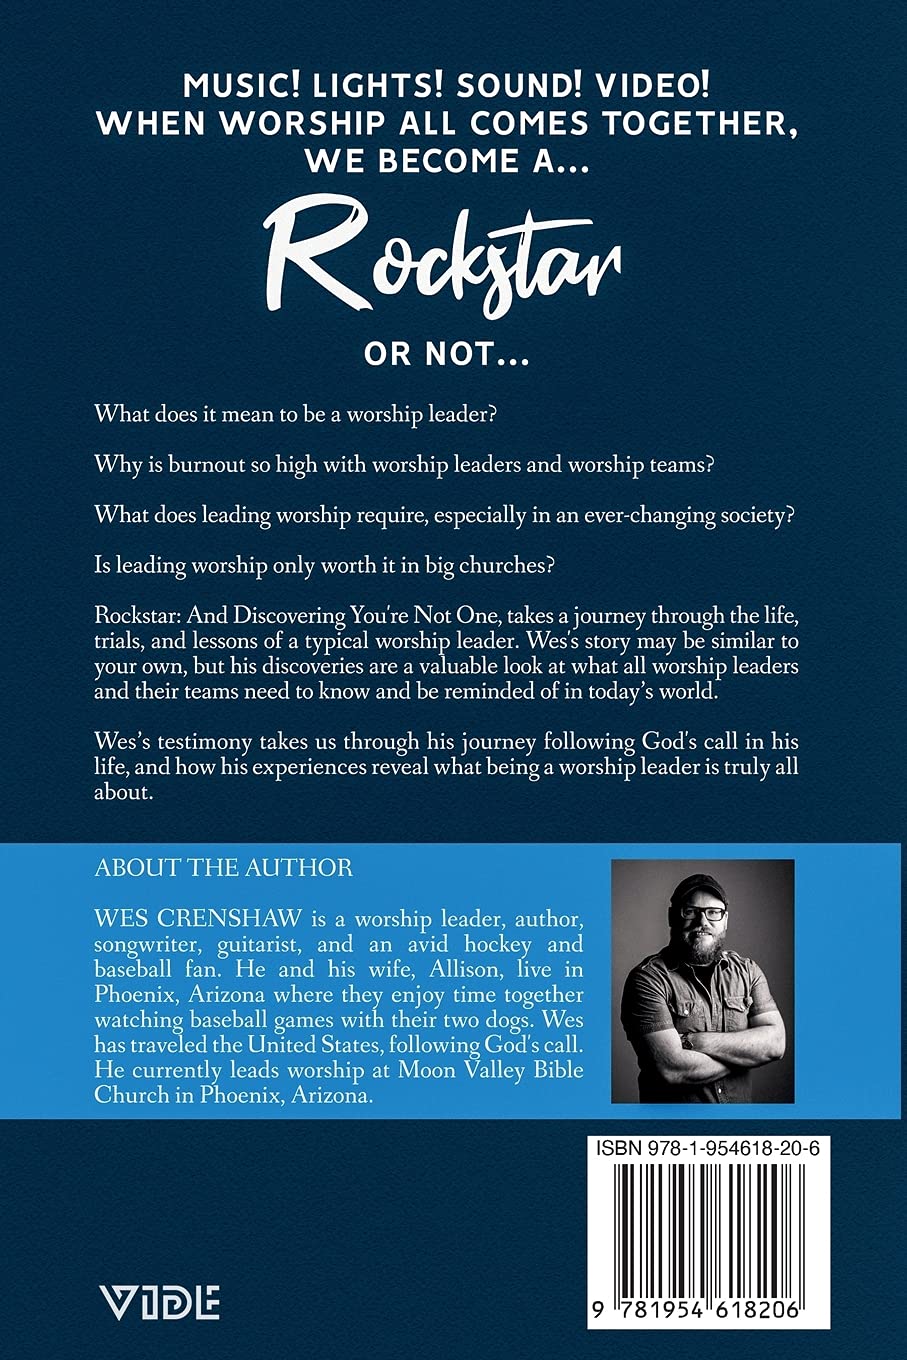 Rockstar: And Discovering You're Not One